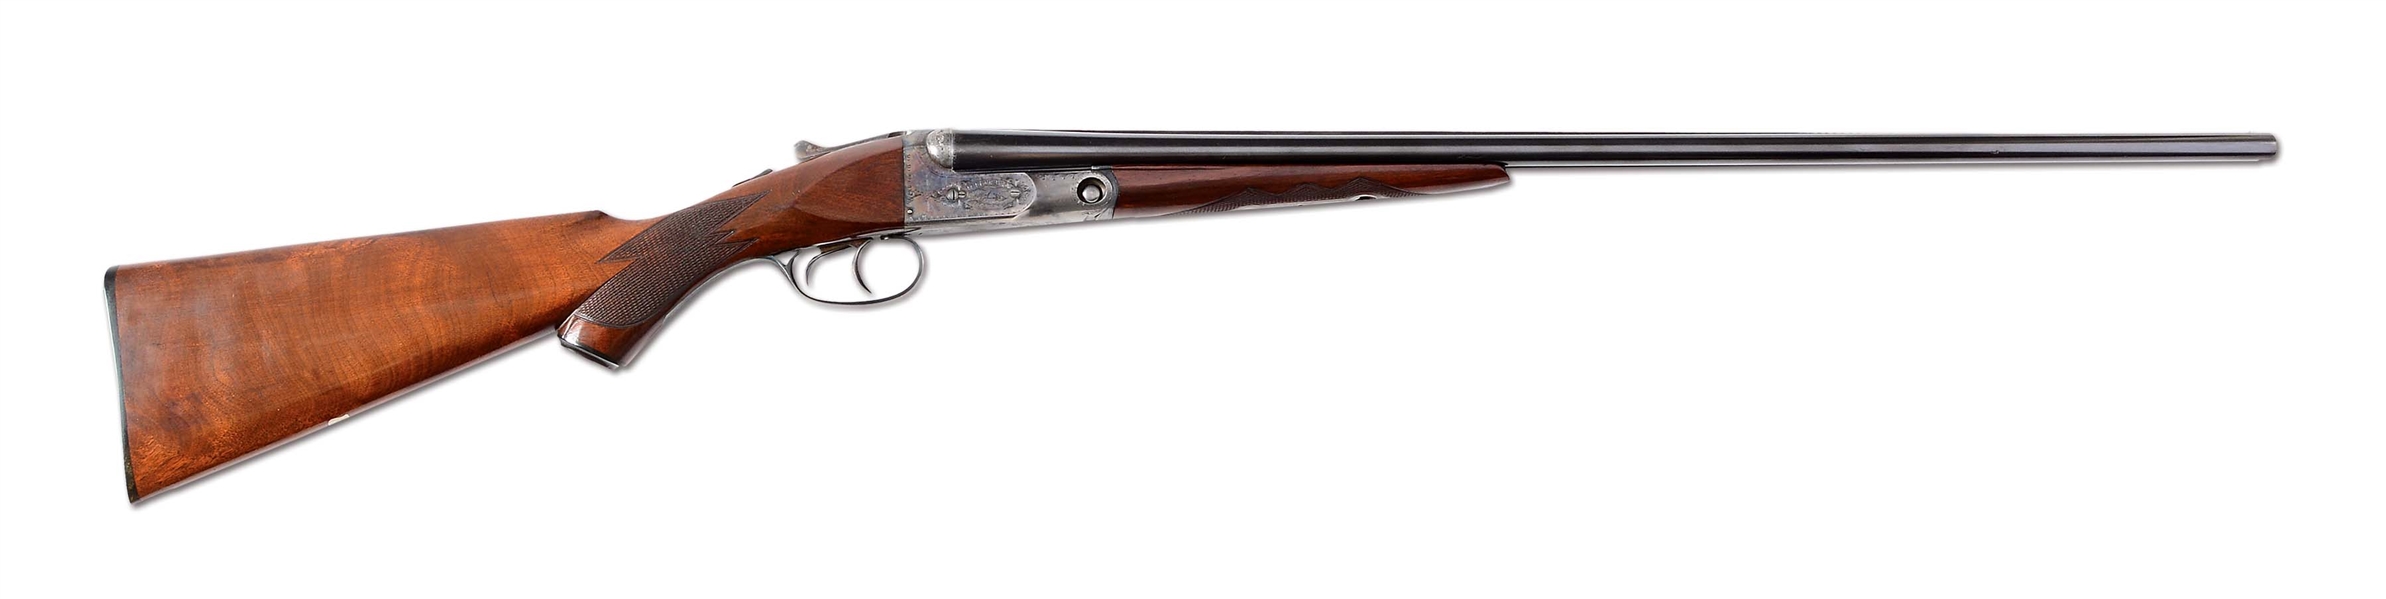 (C) EXCEPTIONALLY RARE AND DESIRABLE 28 GAUGE PARKER GHE SHOTGUN WITH 28" BARRELS (1930).